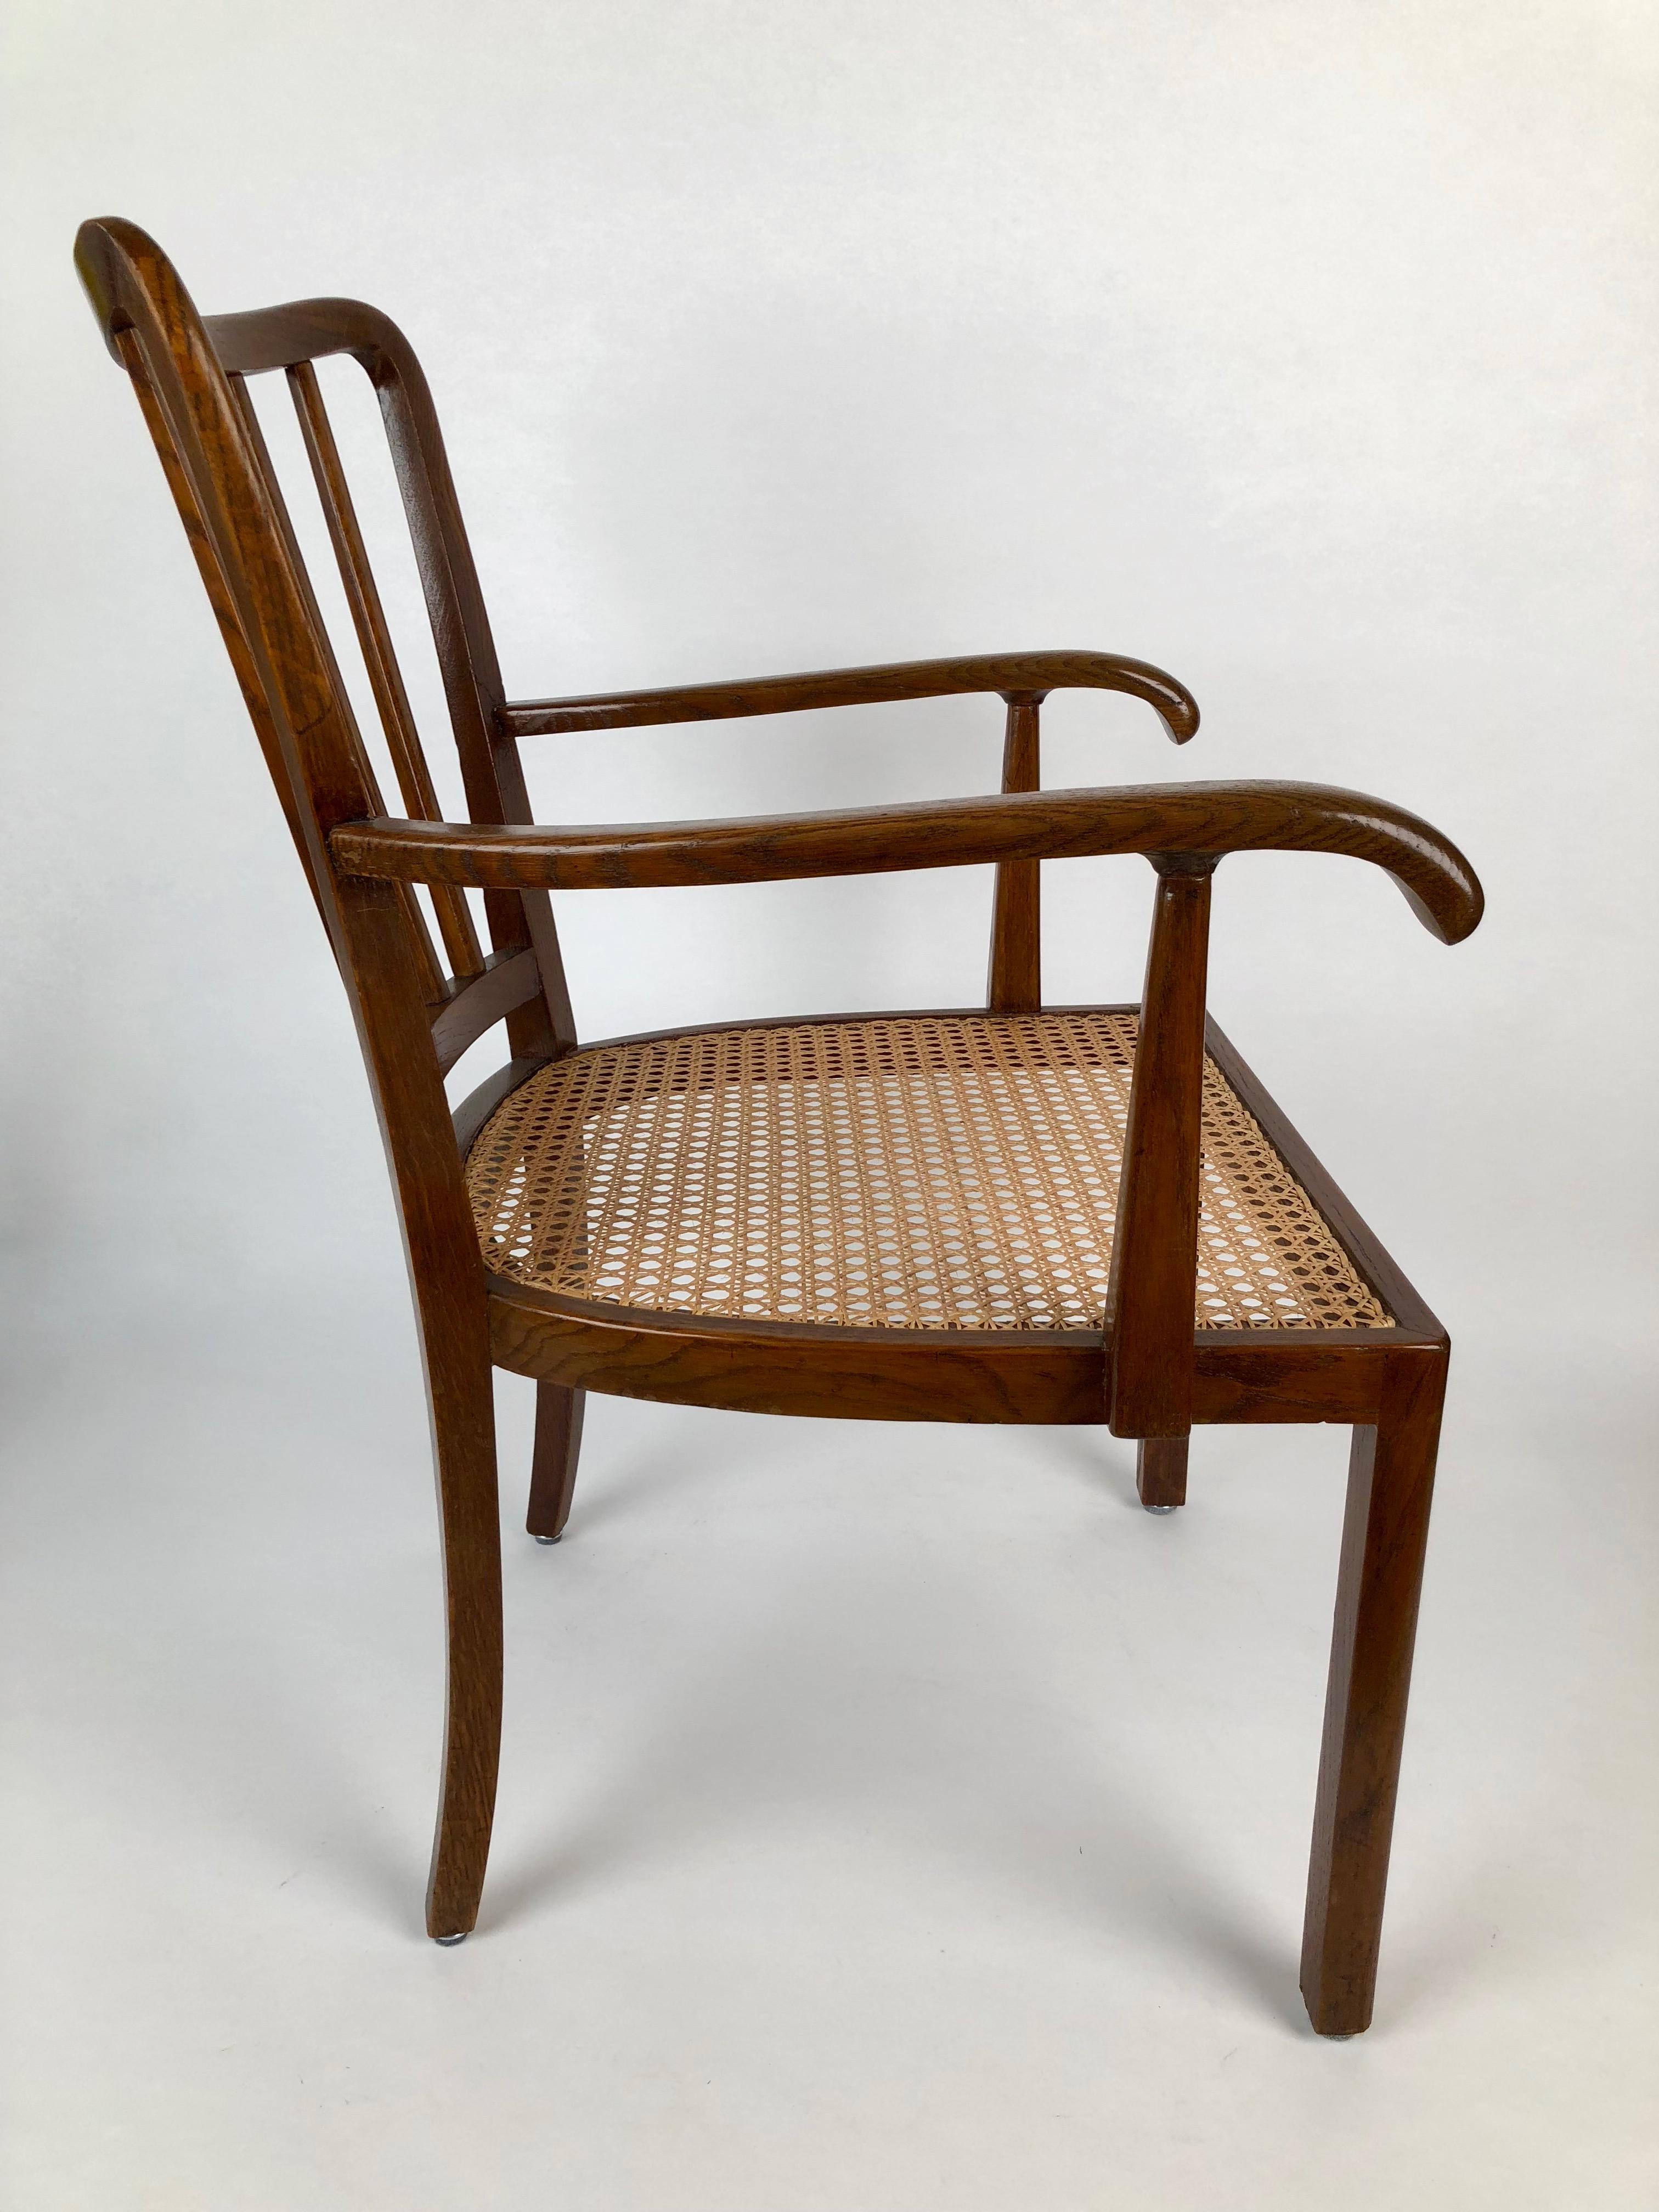 Light weight armchair designed and made in Vienna in the 1930s influenced by Josef Frank.
The frame is constructed of beechwood, the Viennese can seat has bee renewed.
The wood has small repairs and is refreshed.